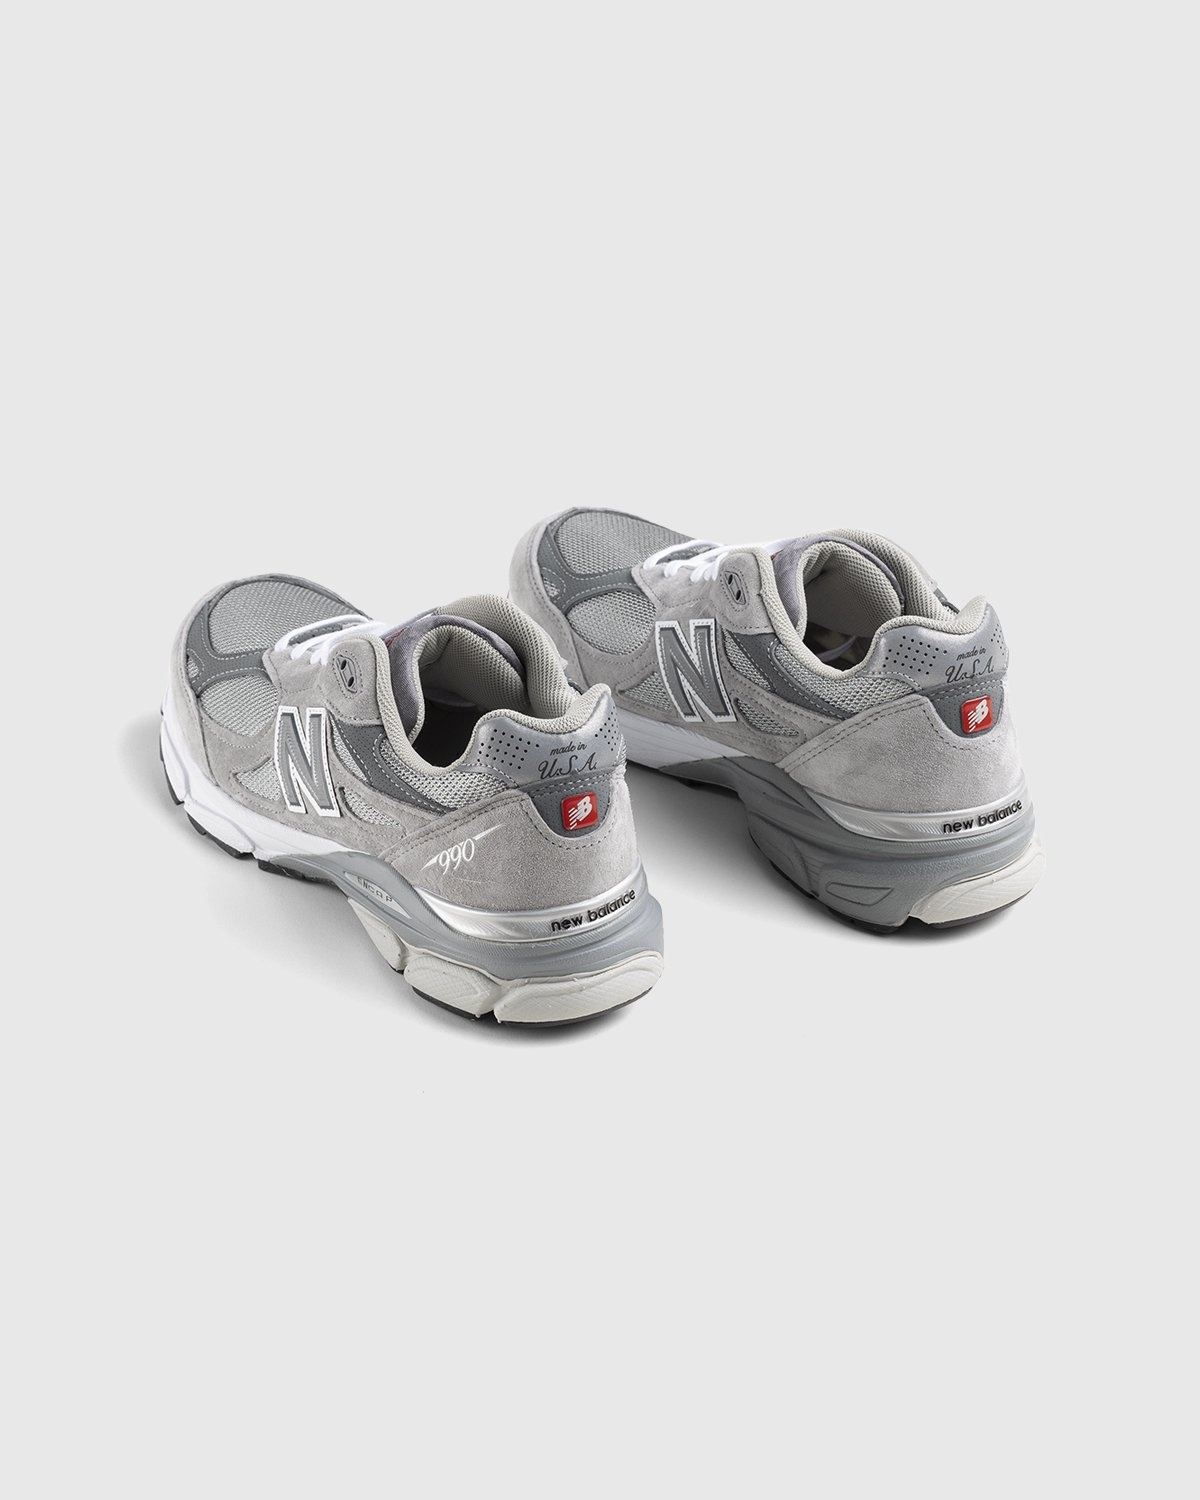 New Balance – M990GY3 Grey - Low Top Sneakers - Grey - Image 4